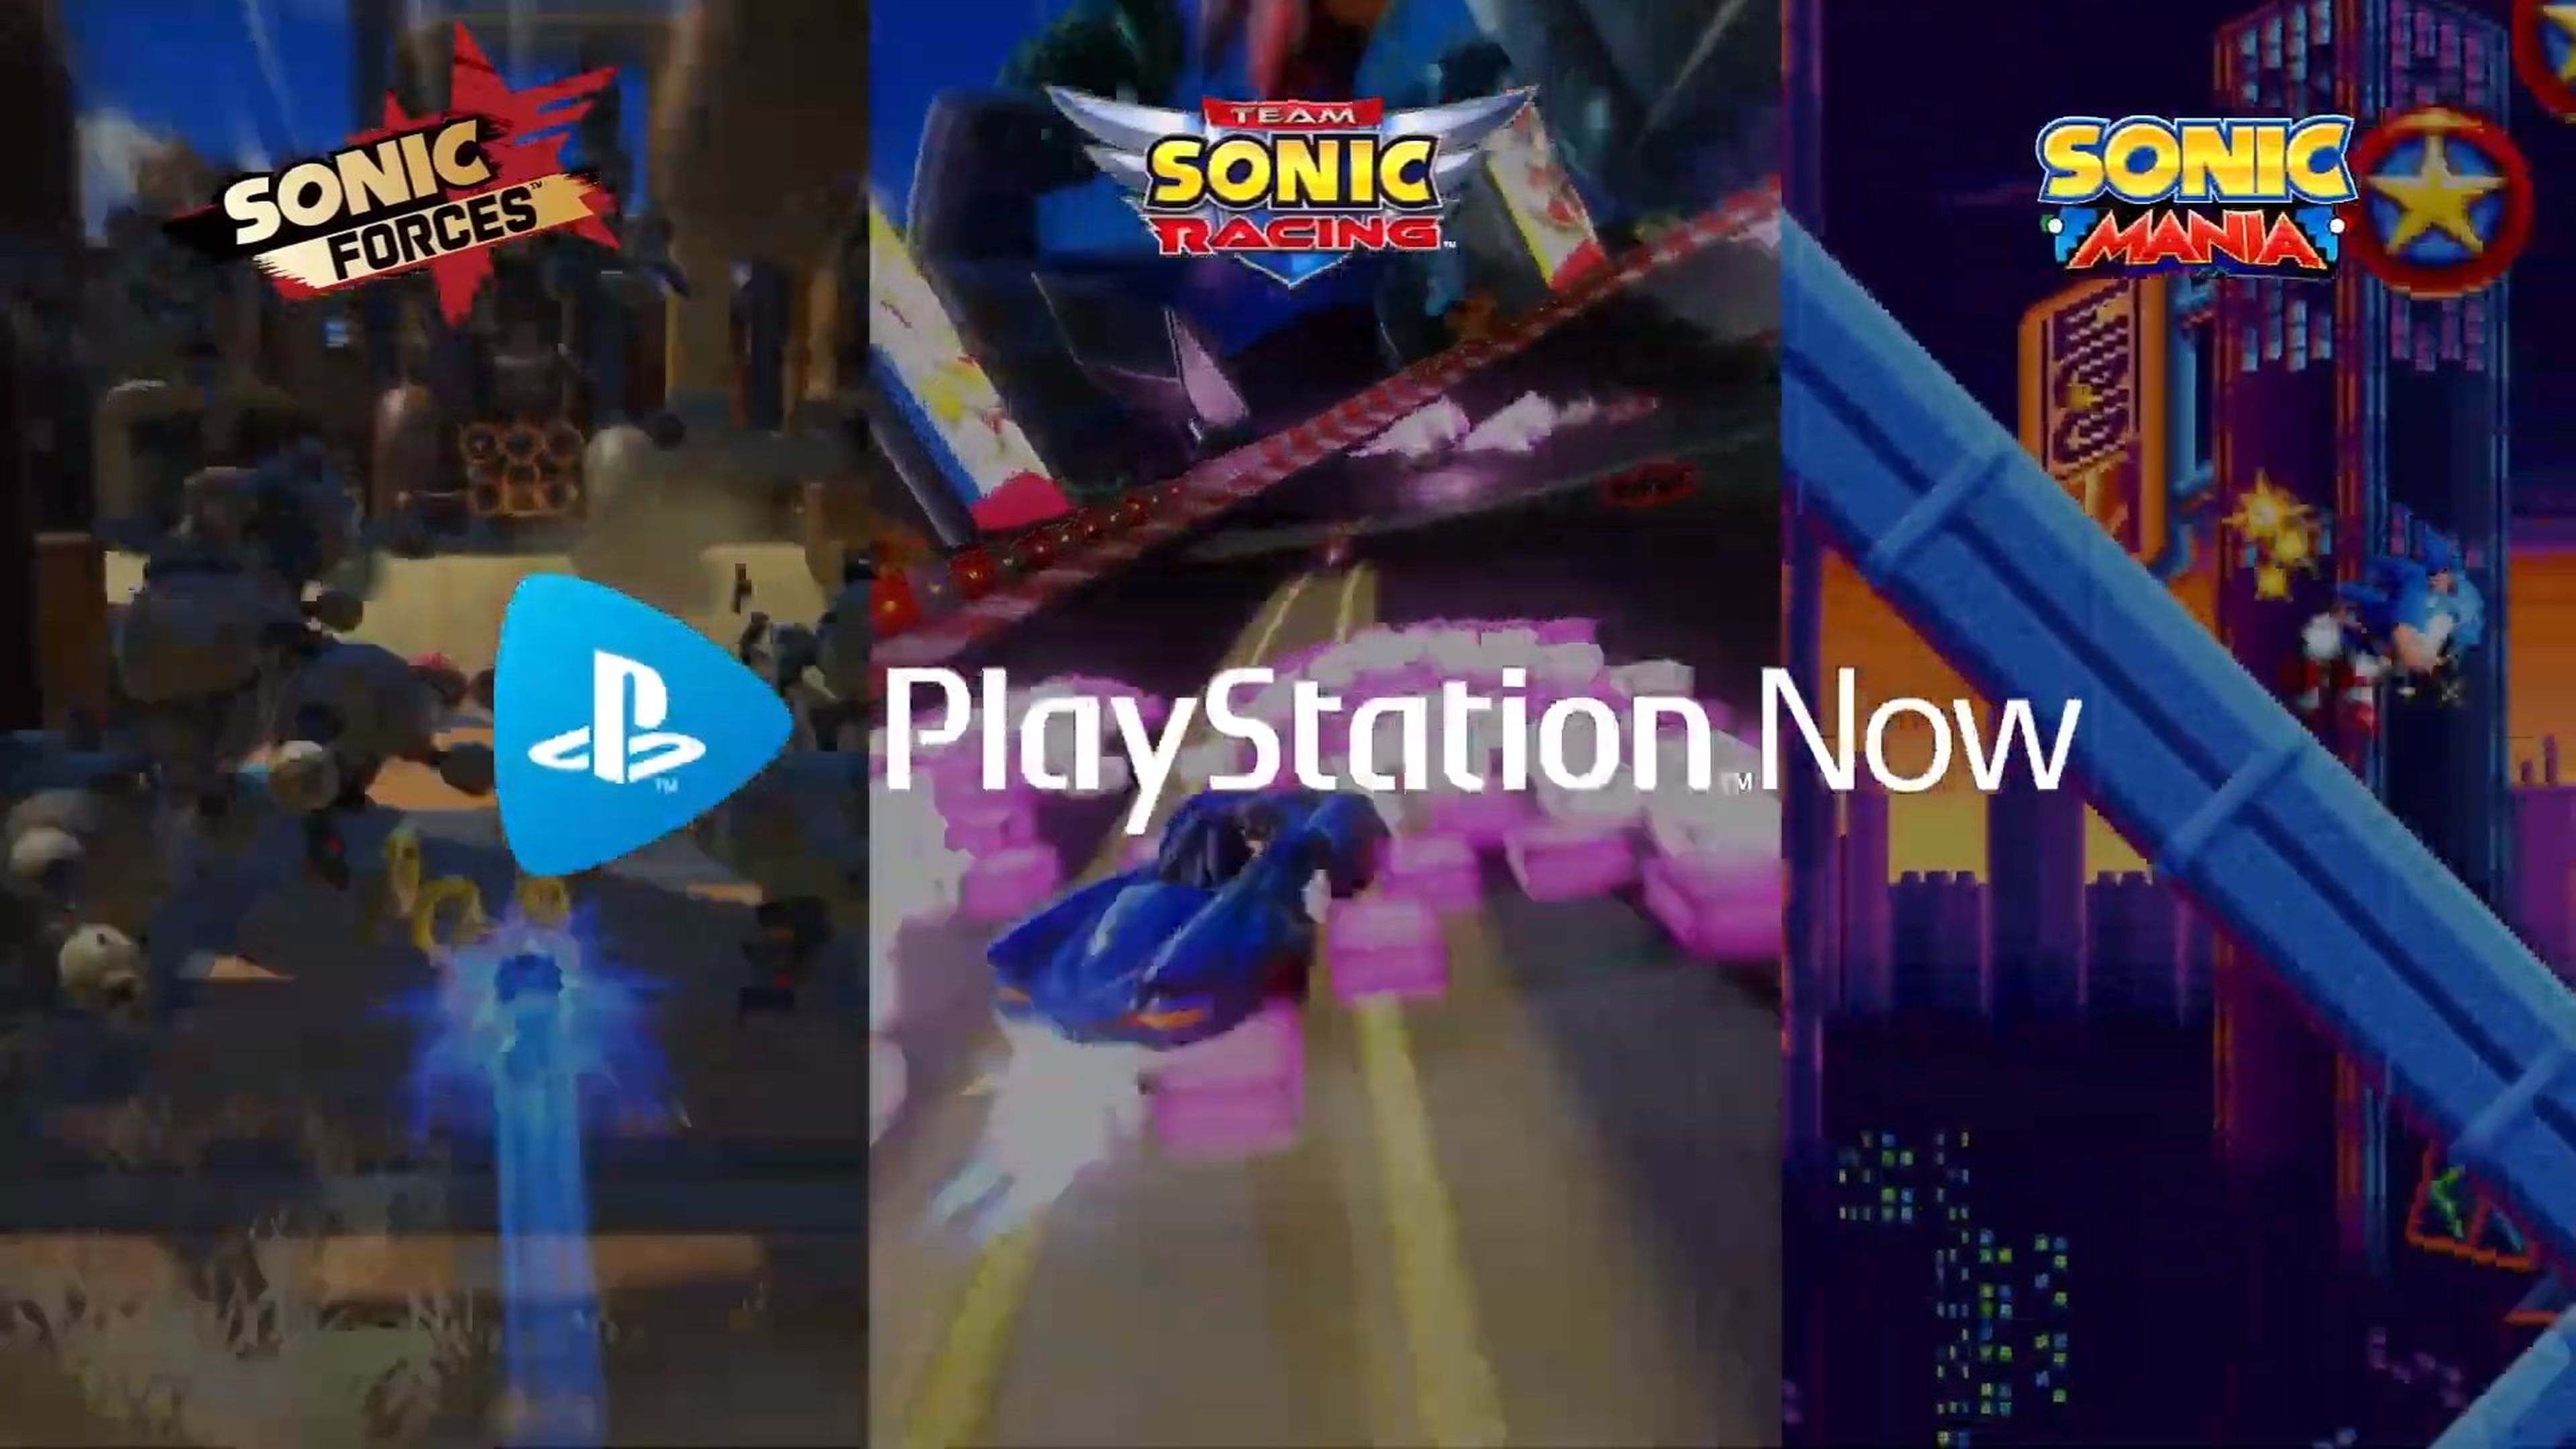 Sonic Ps now